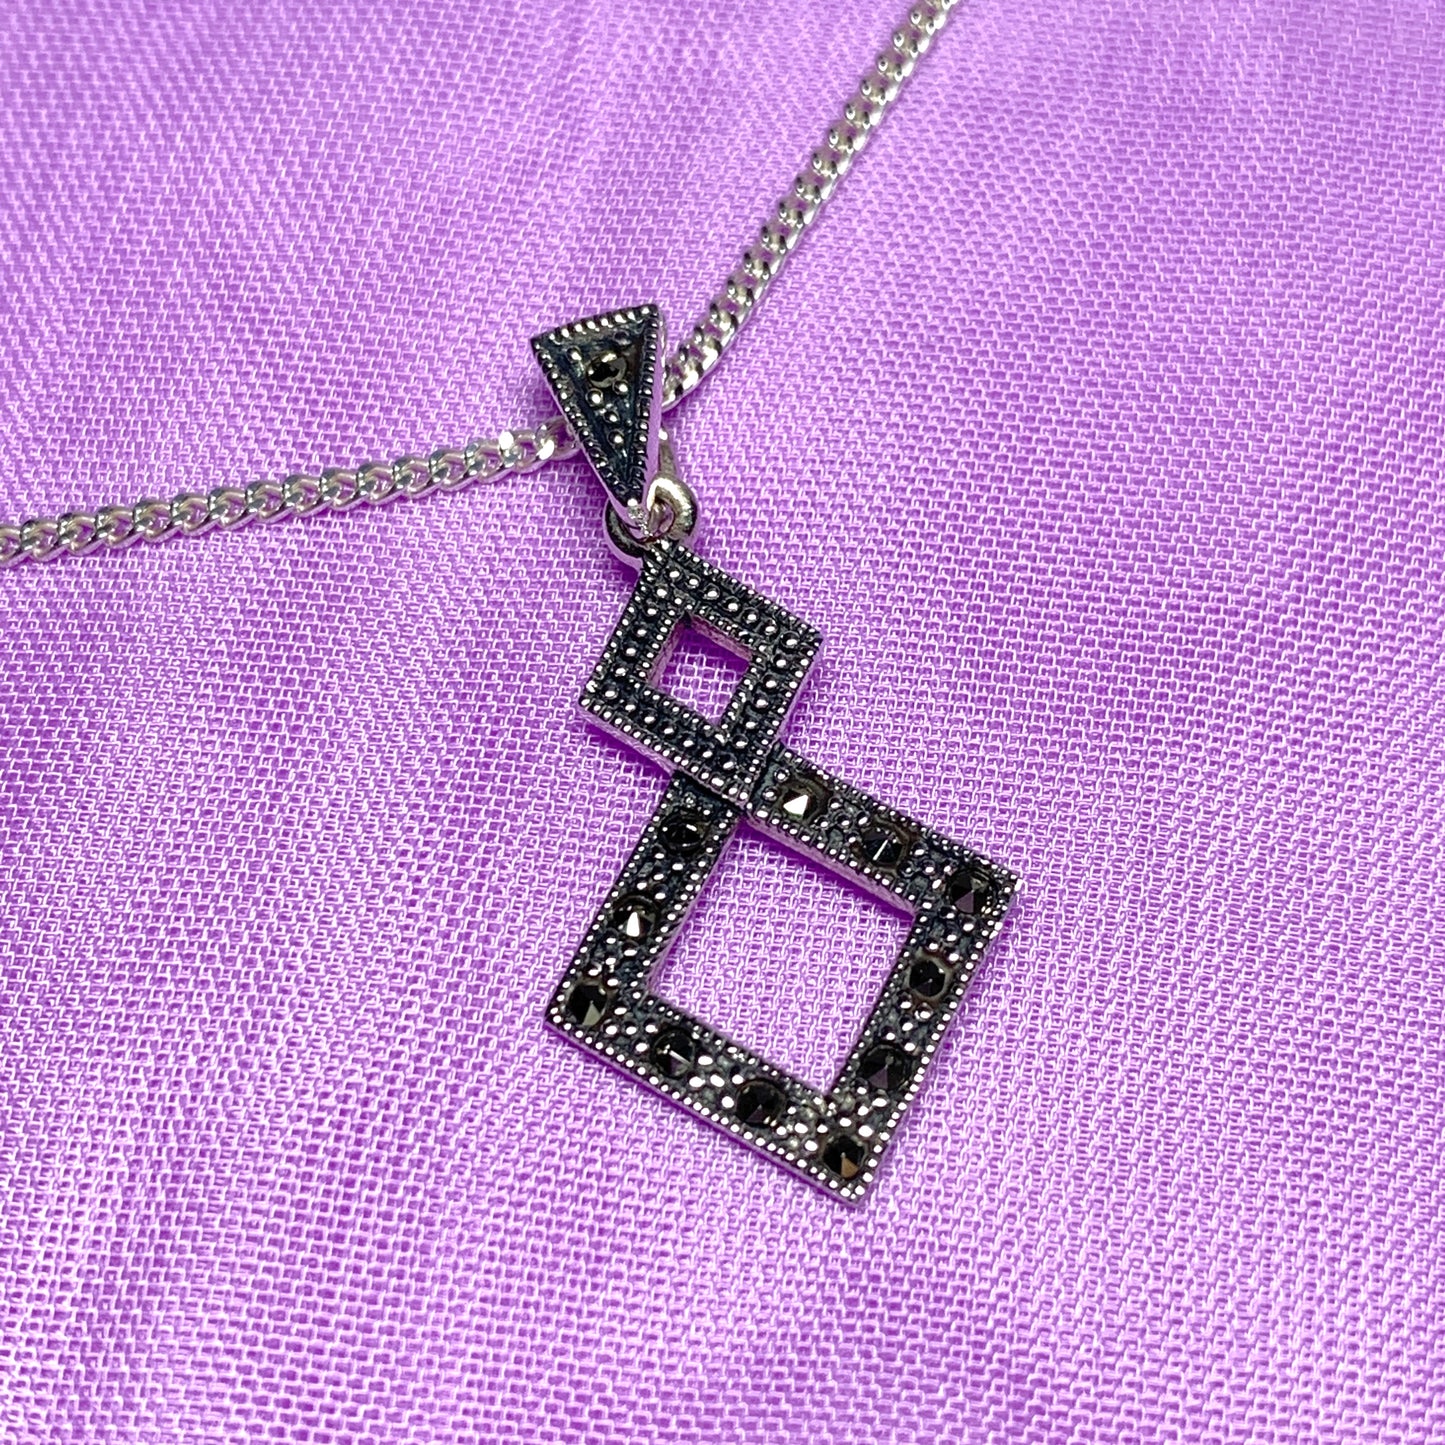 Marcasite Necklace Double Diamond Square Sterling Silver